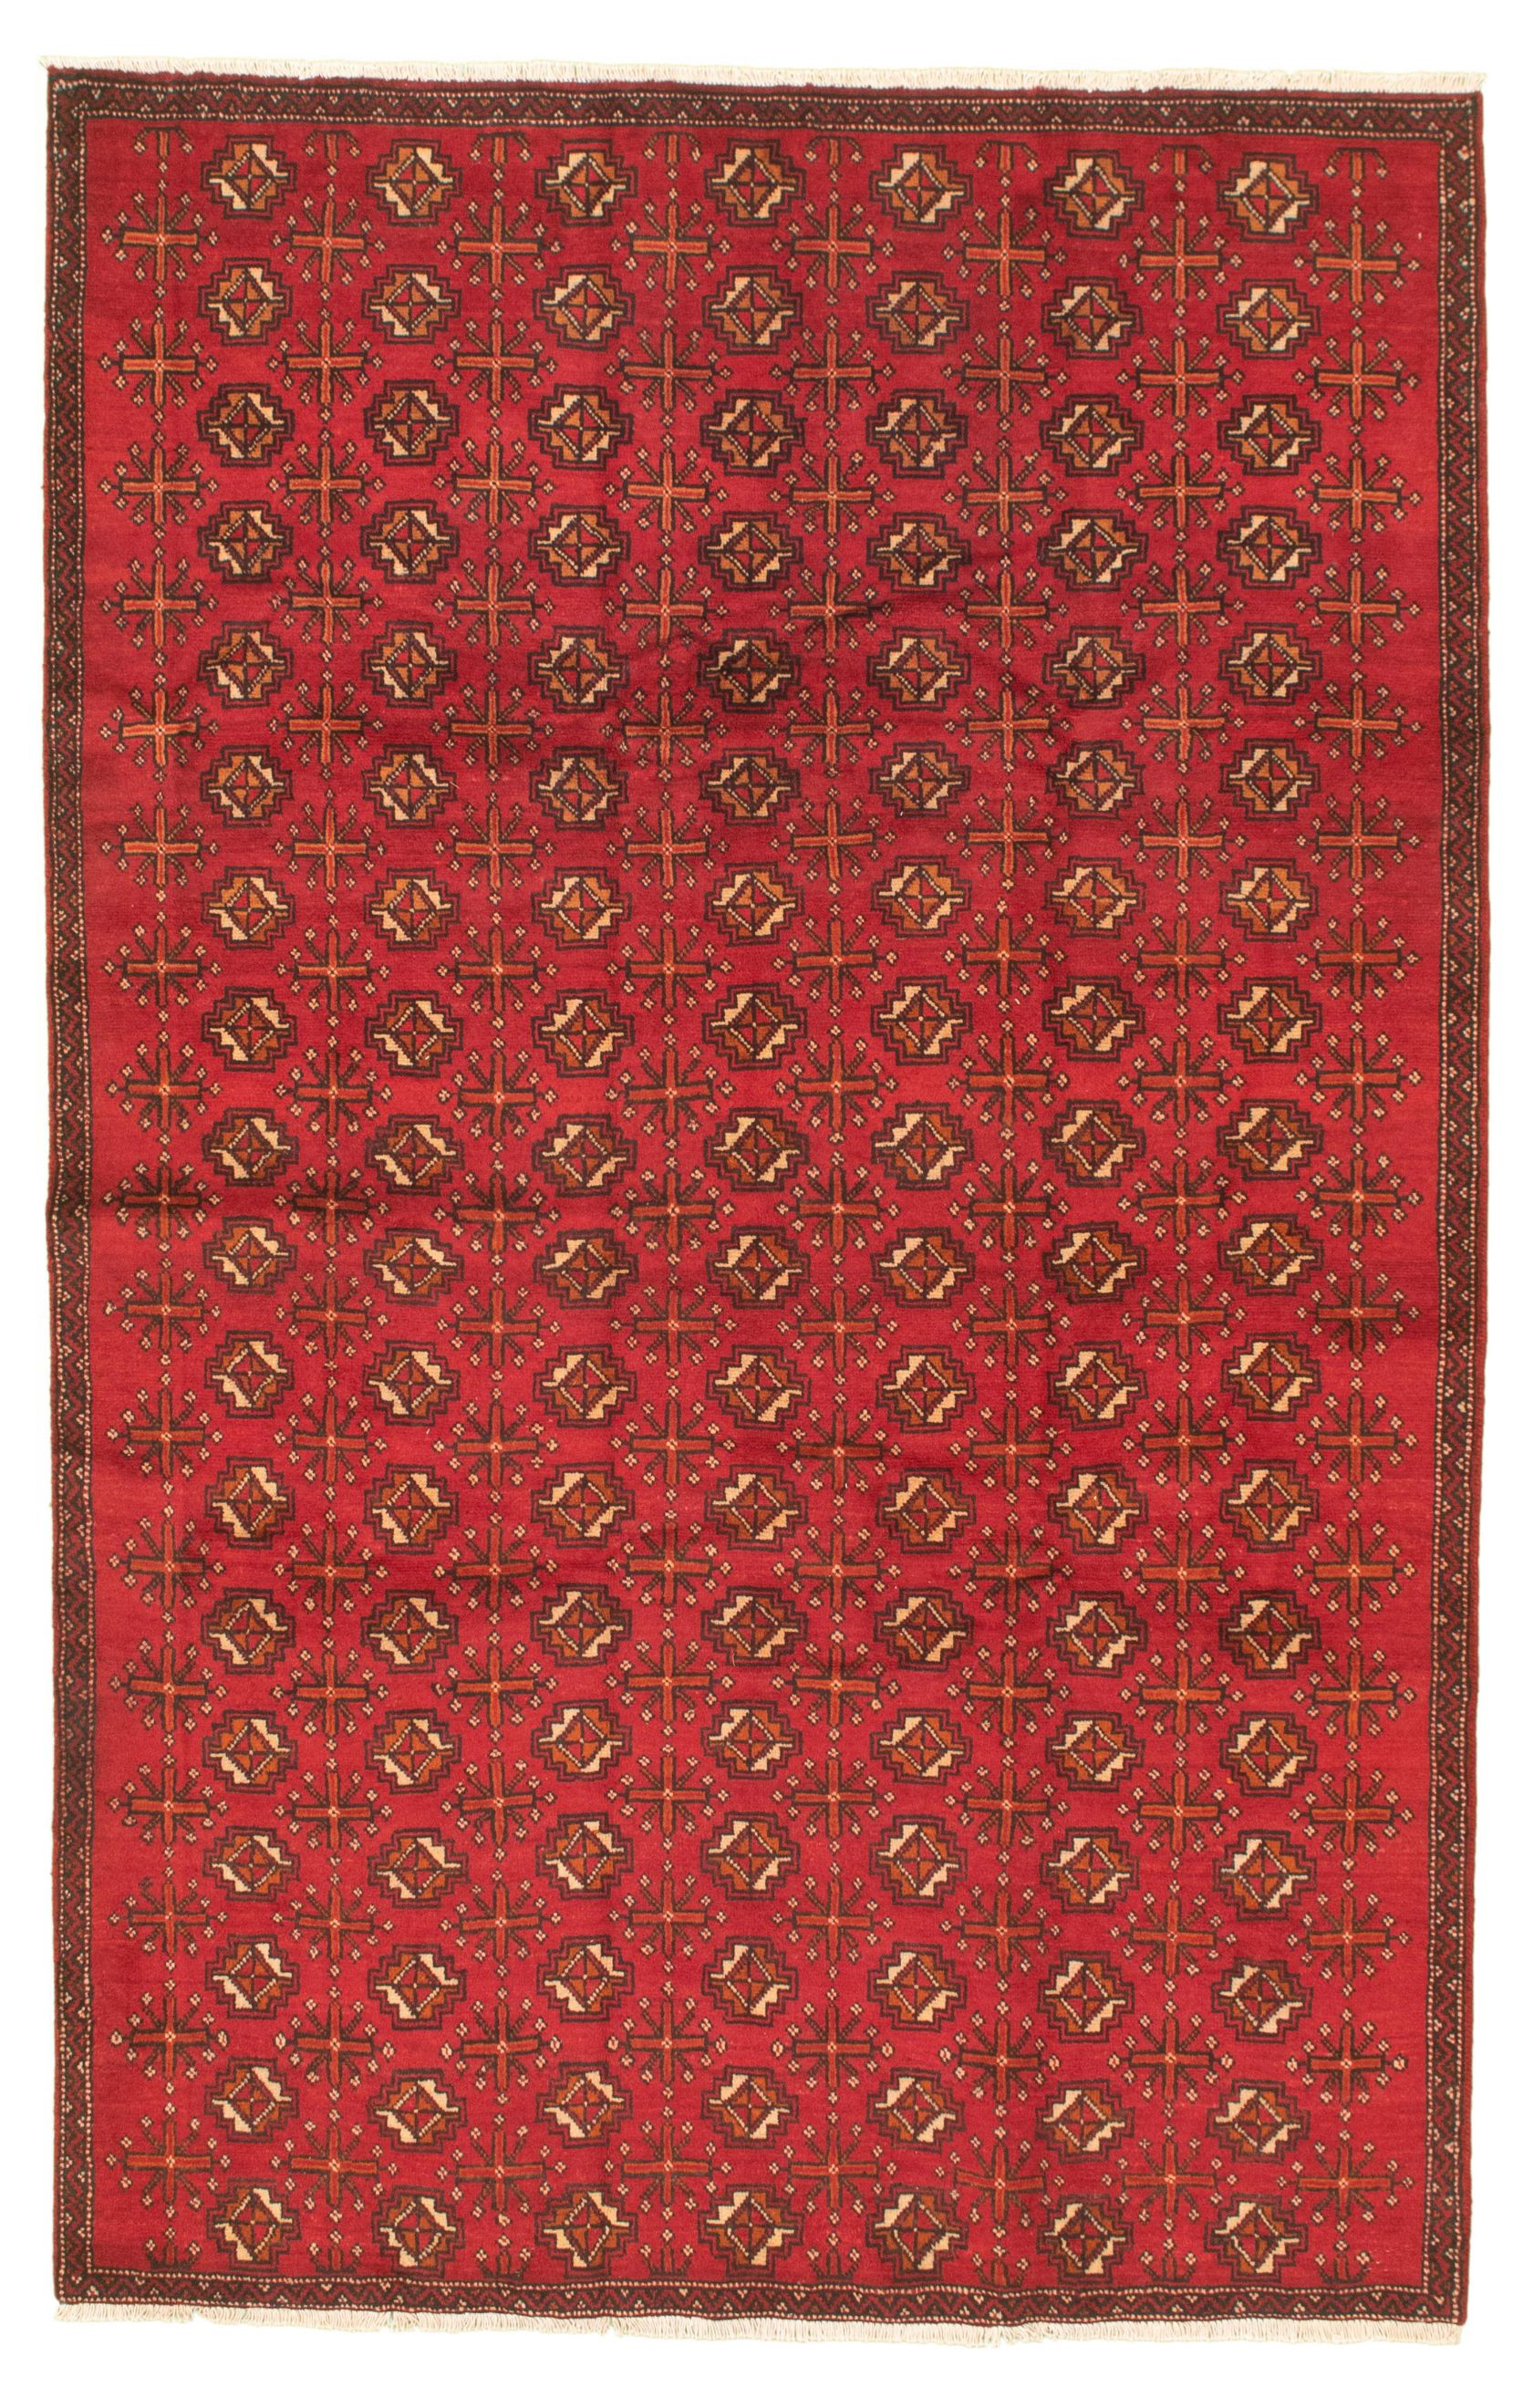 Hand-knotted Authentic Turkish Red Wool Rug 5'6" x 8'10" Size: 5'6" x 8'10"  